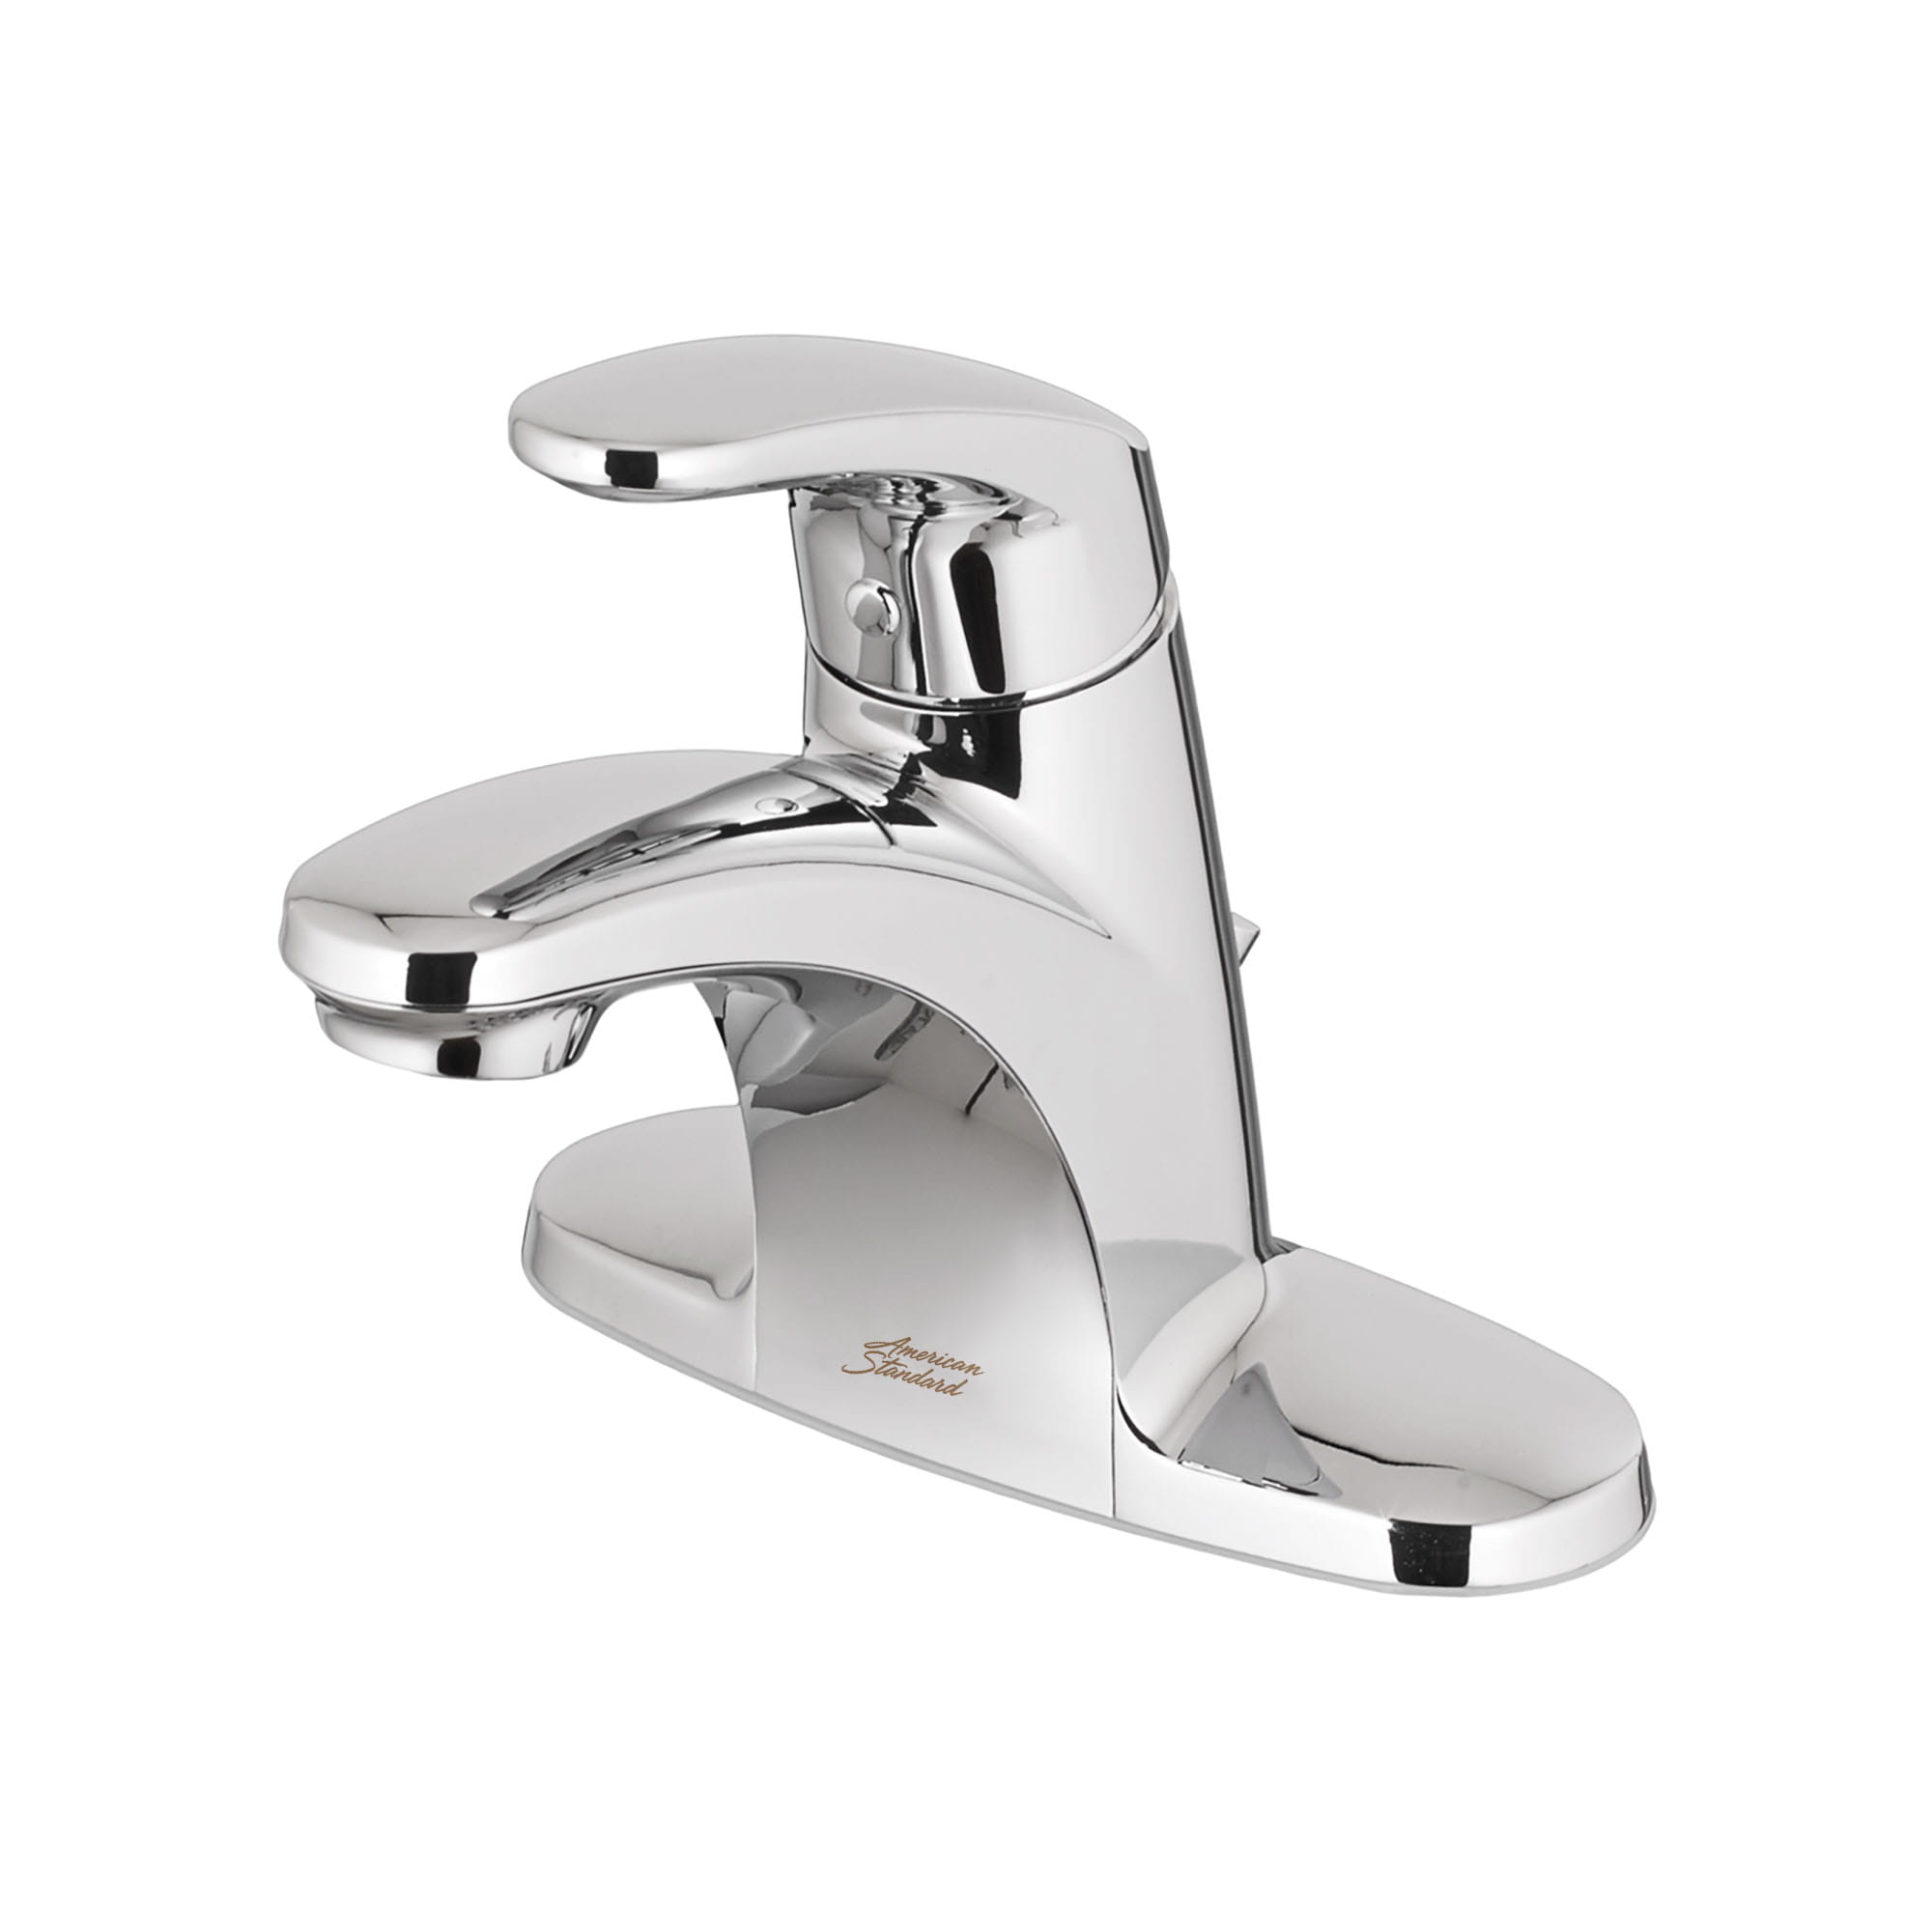 Colony® PRO 4-Inch Centerset Single-Handle Bathroom Faucet 0.5 gpm/1.9 L/min With Lever Handle